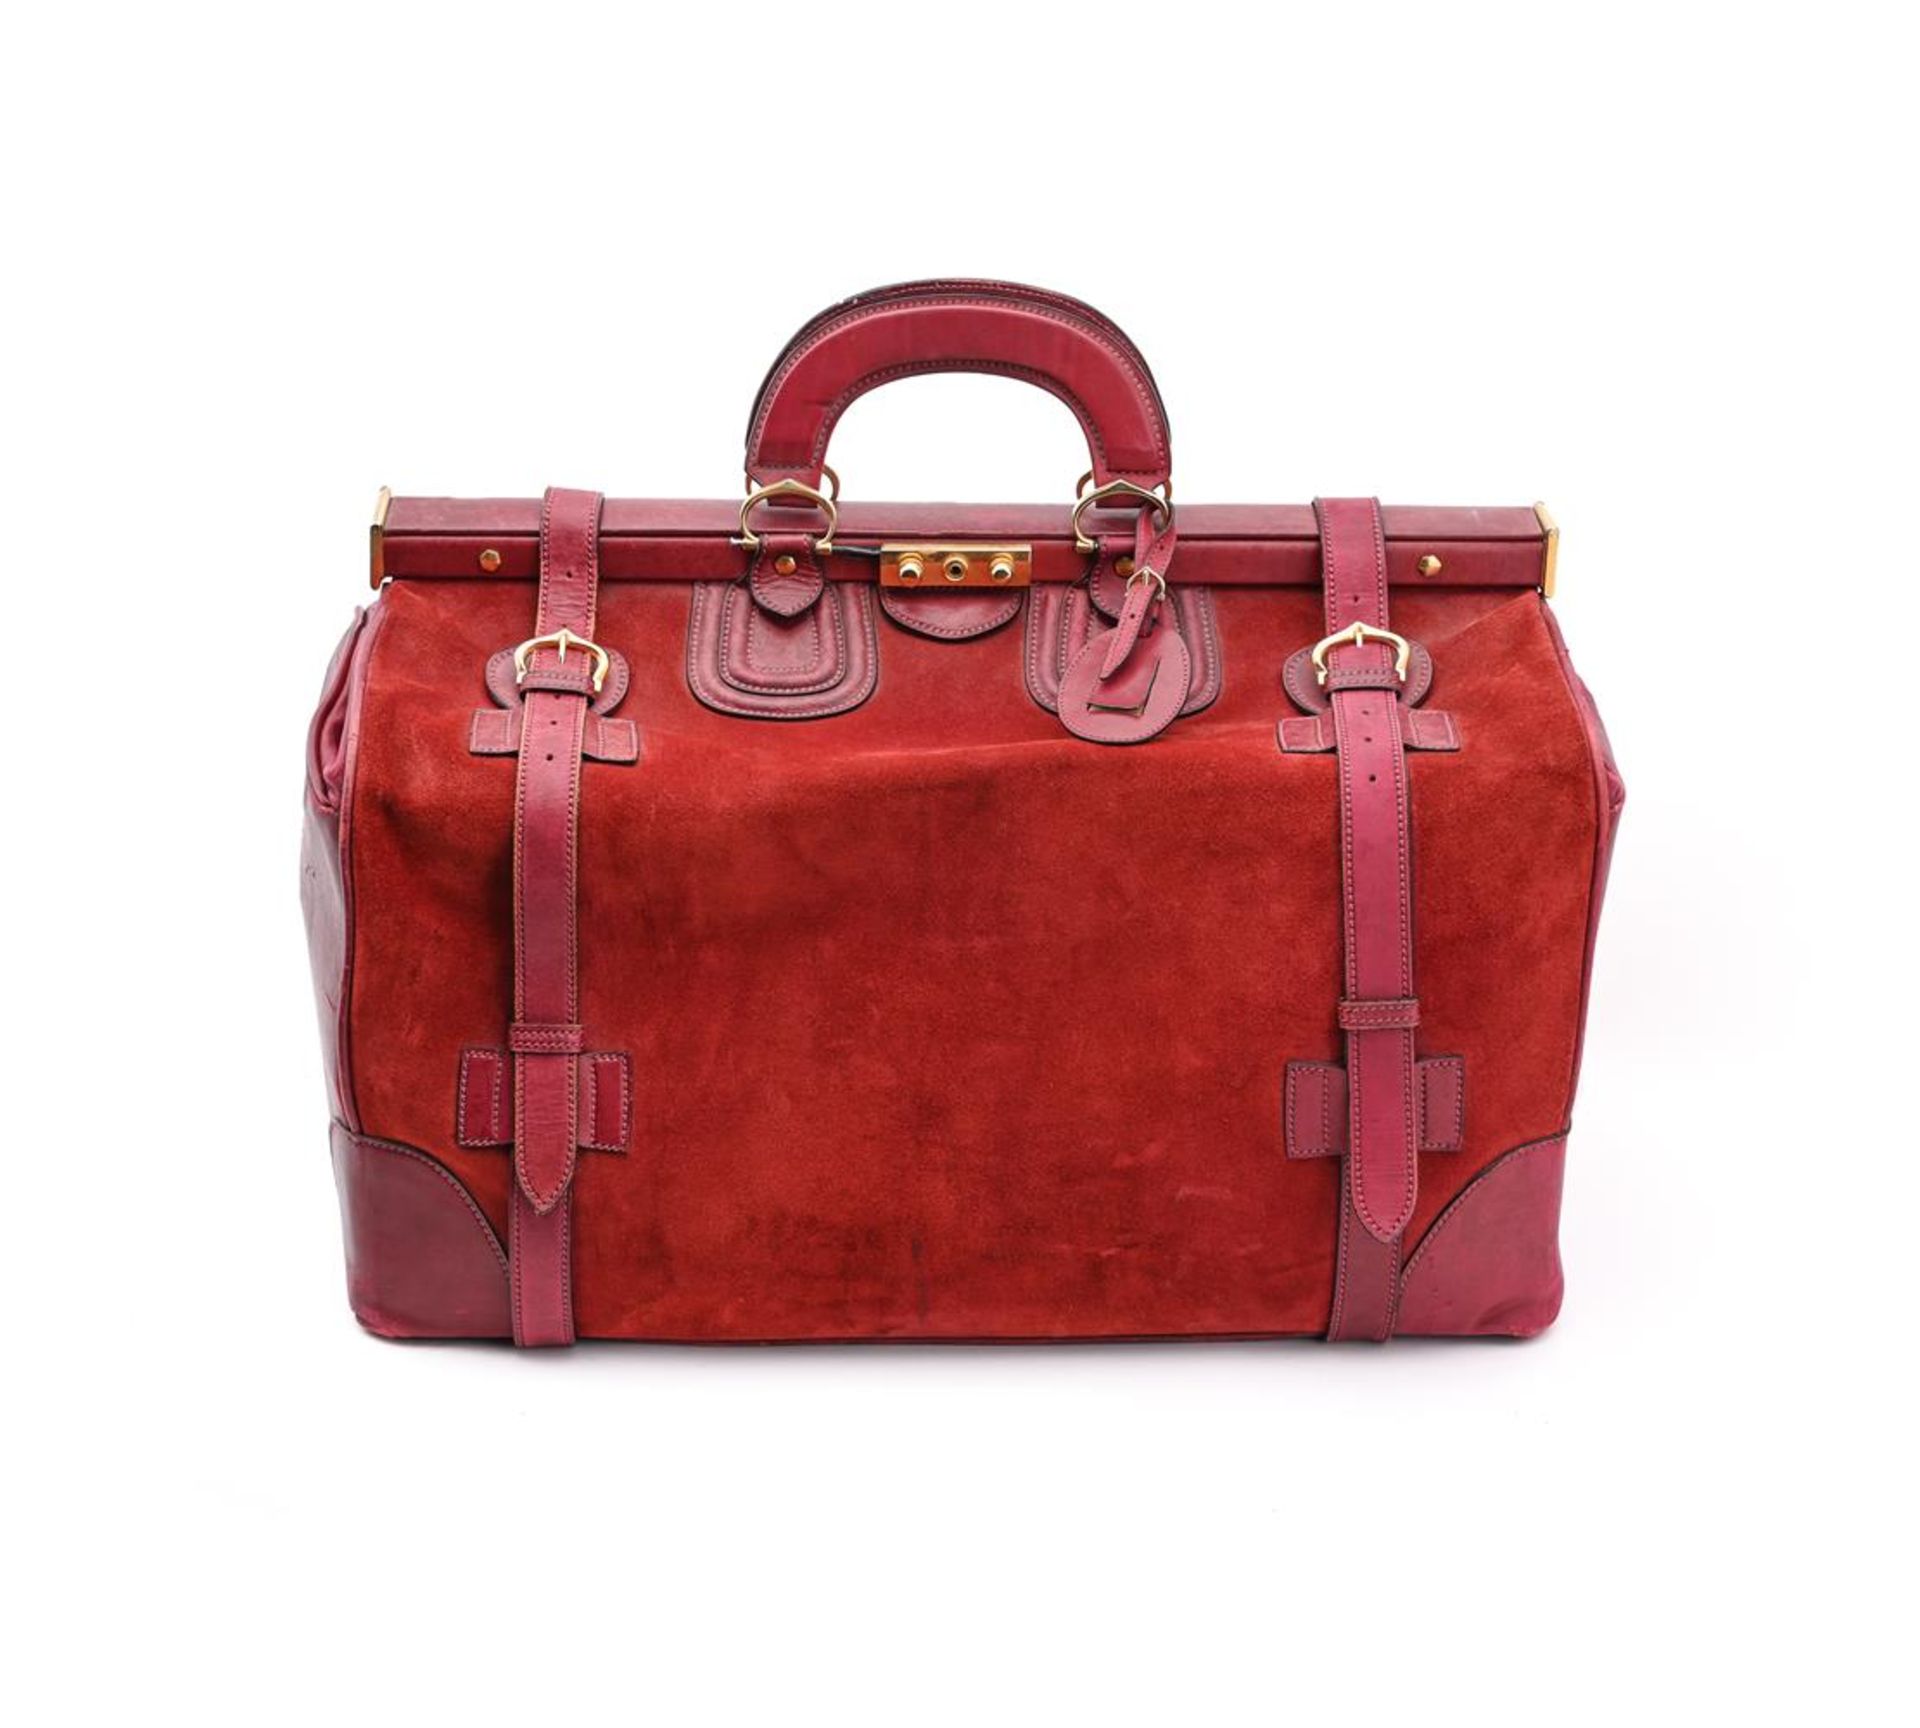 CARTIER, A BURGUNDY LEATHER AND SUEDE DOCTOR'S BAG - Image 2 of 2